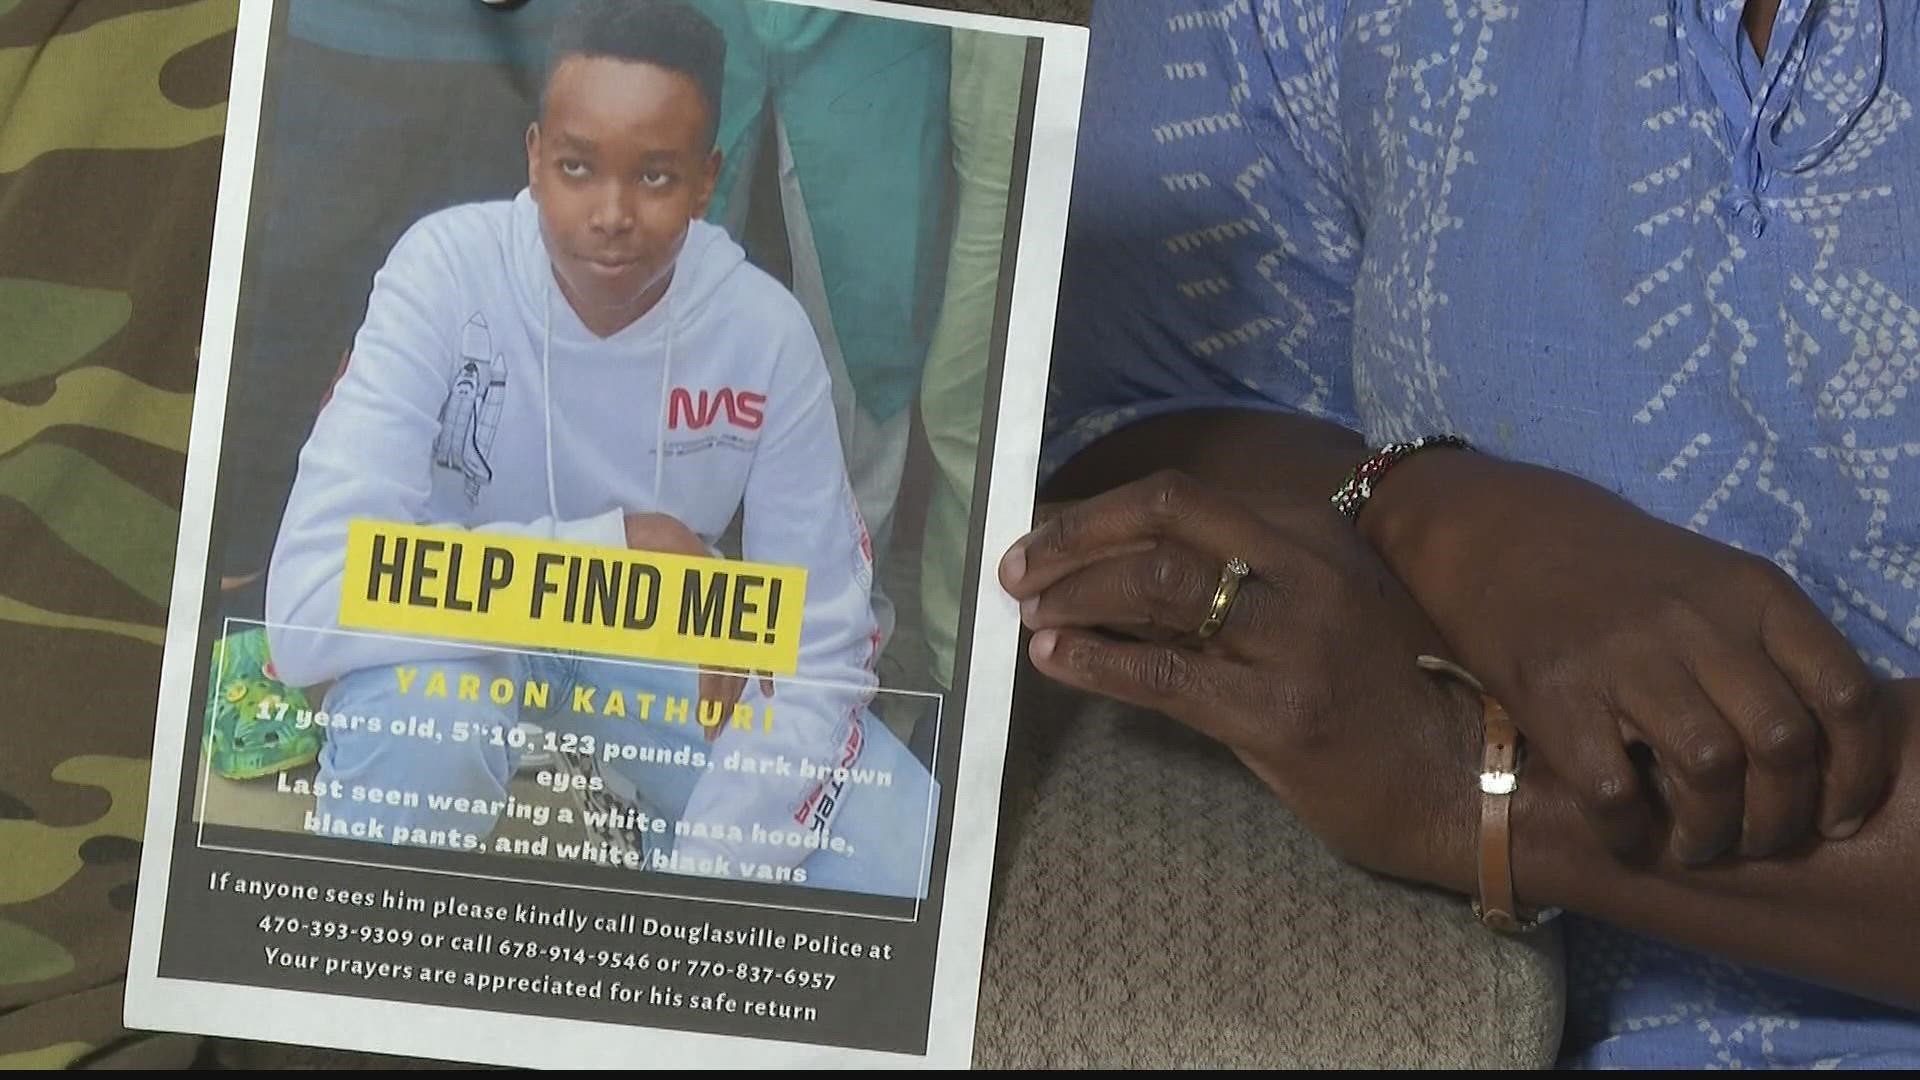 A Douglasville family said they won't give up the search for a missing teenage boy.